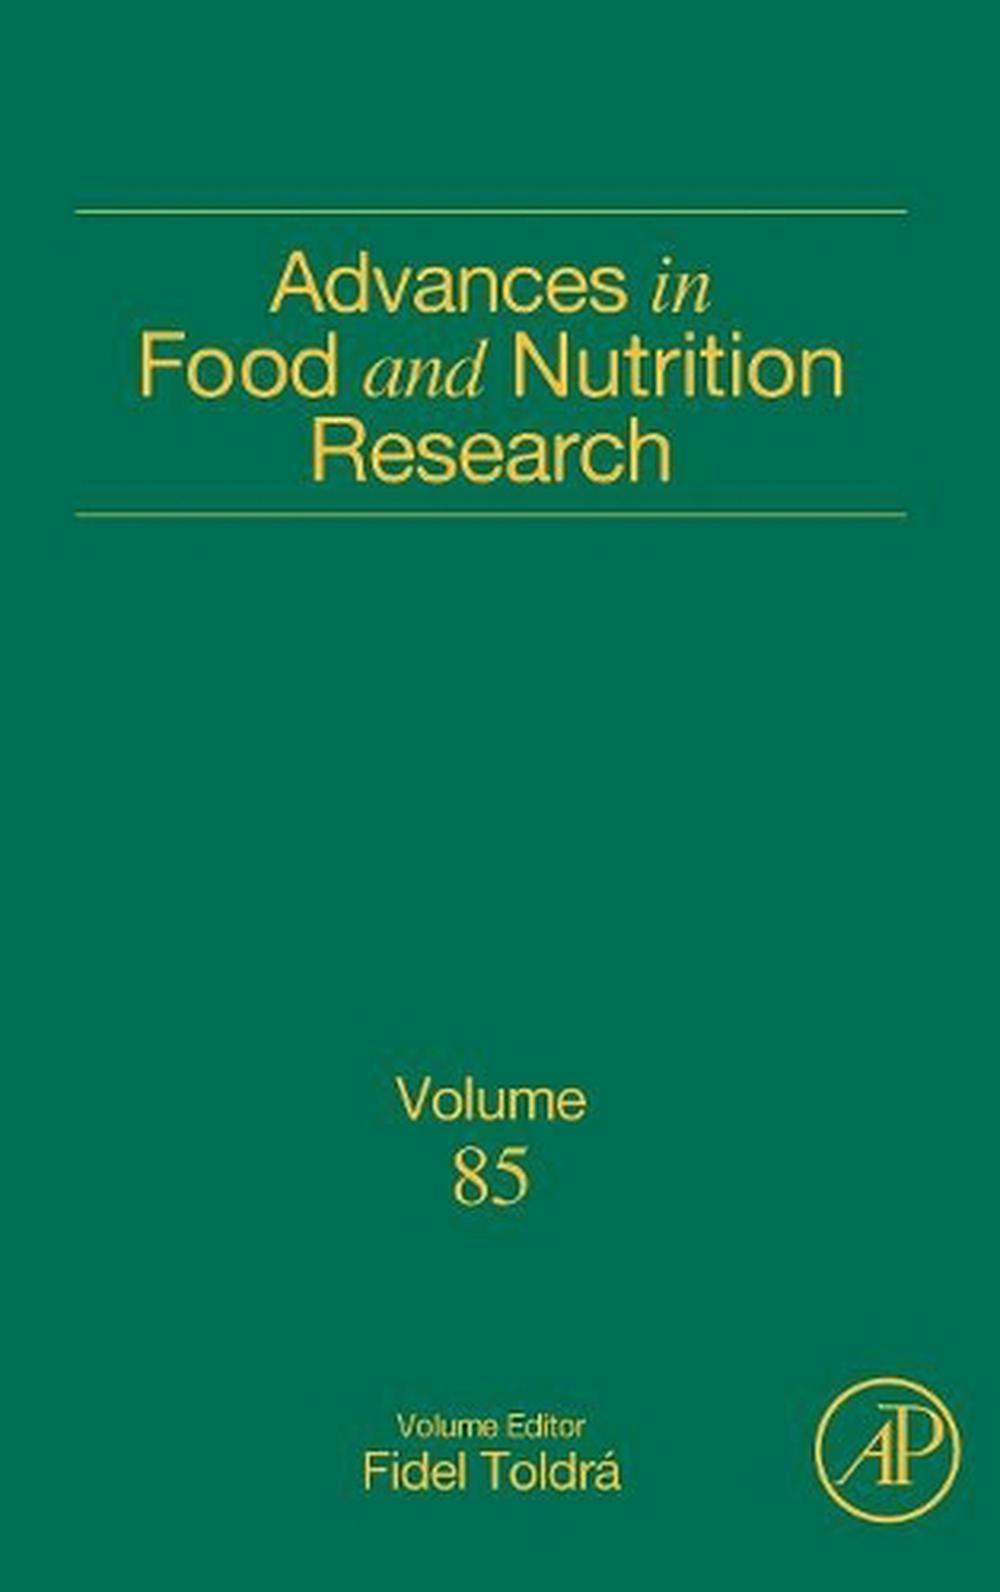 research topics in food and nutrition